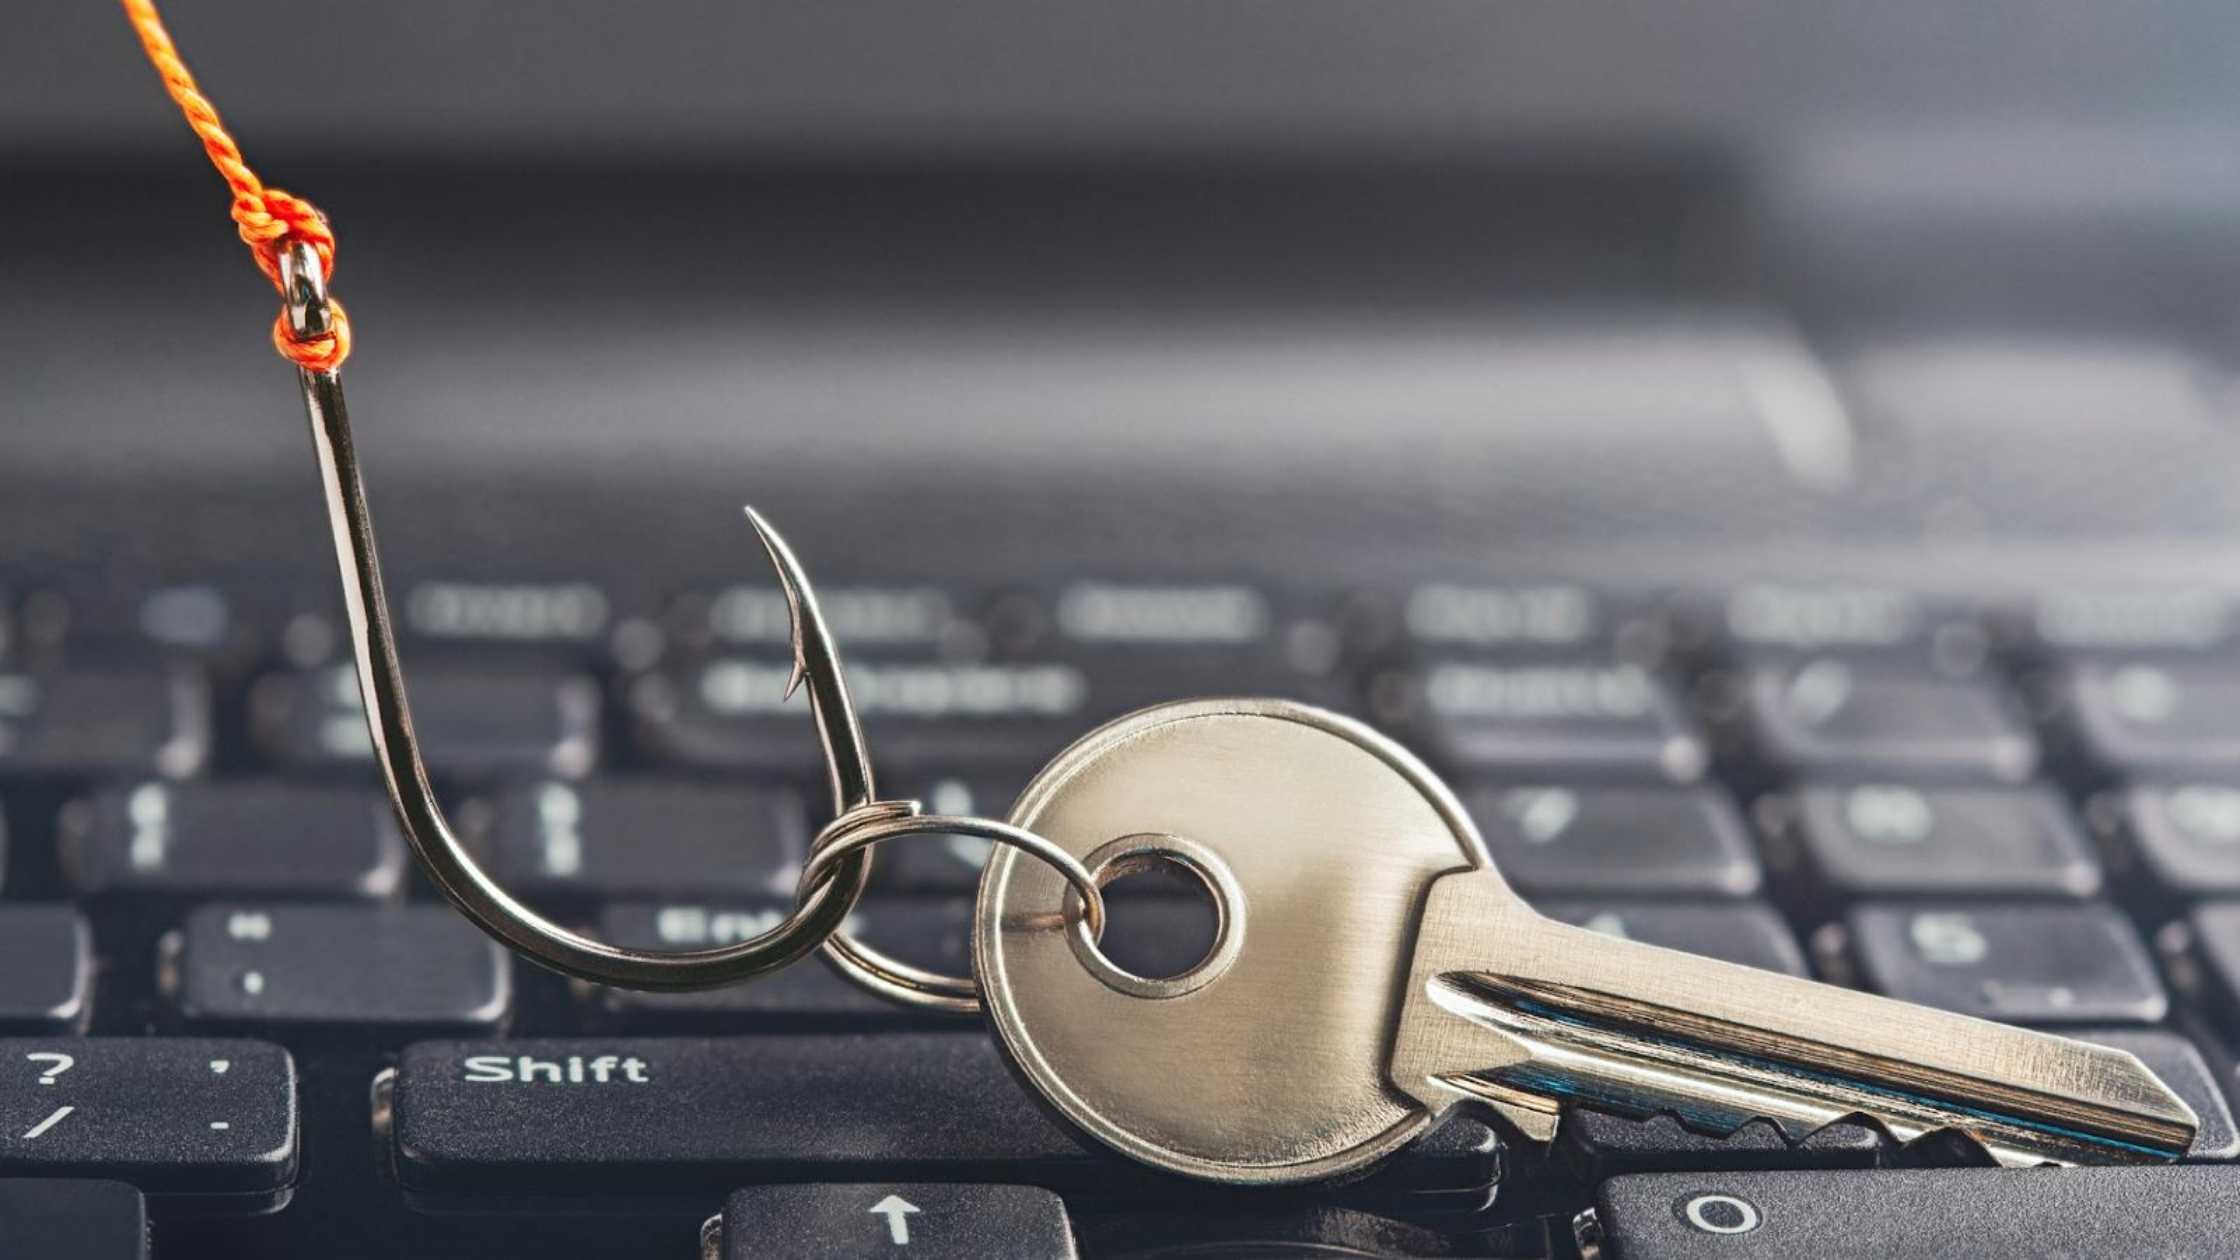 Phishing concept; Key on a fishing hook over a computer keyboard